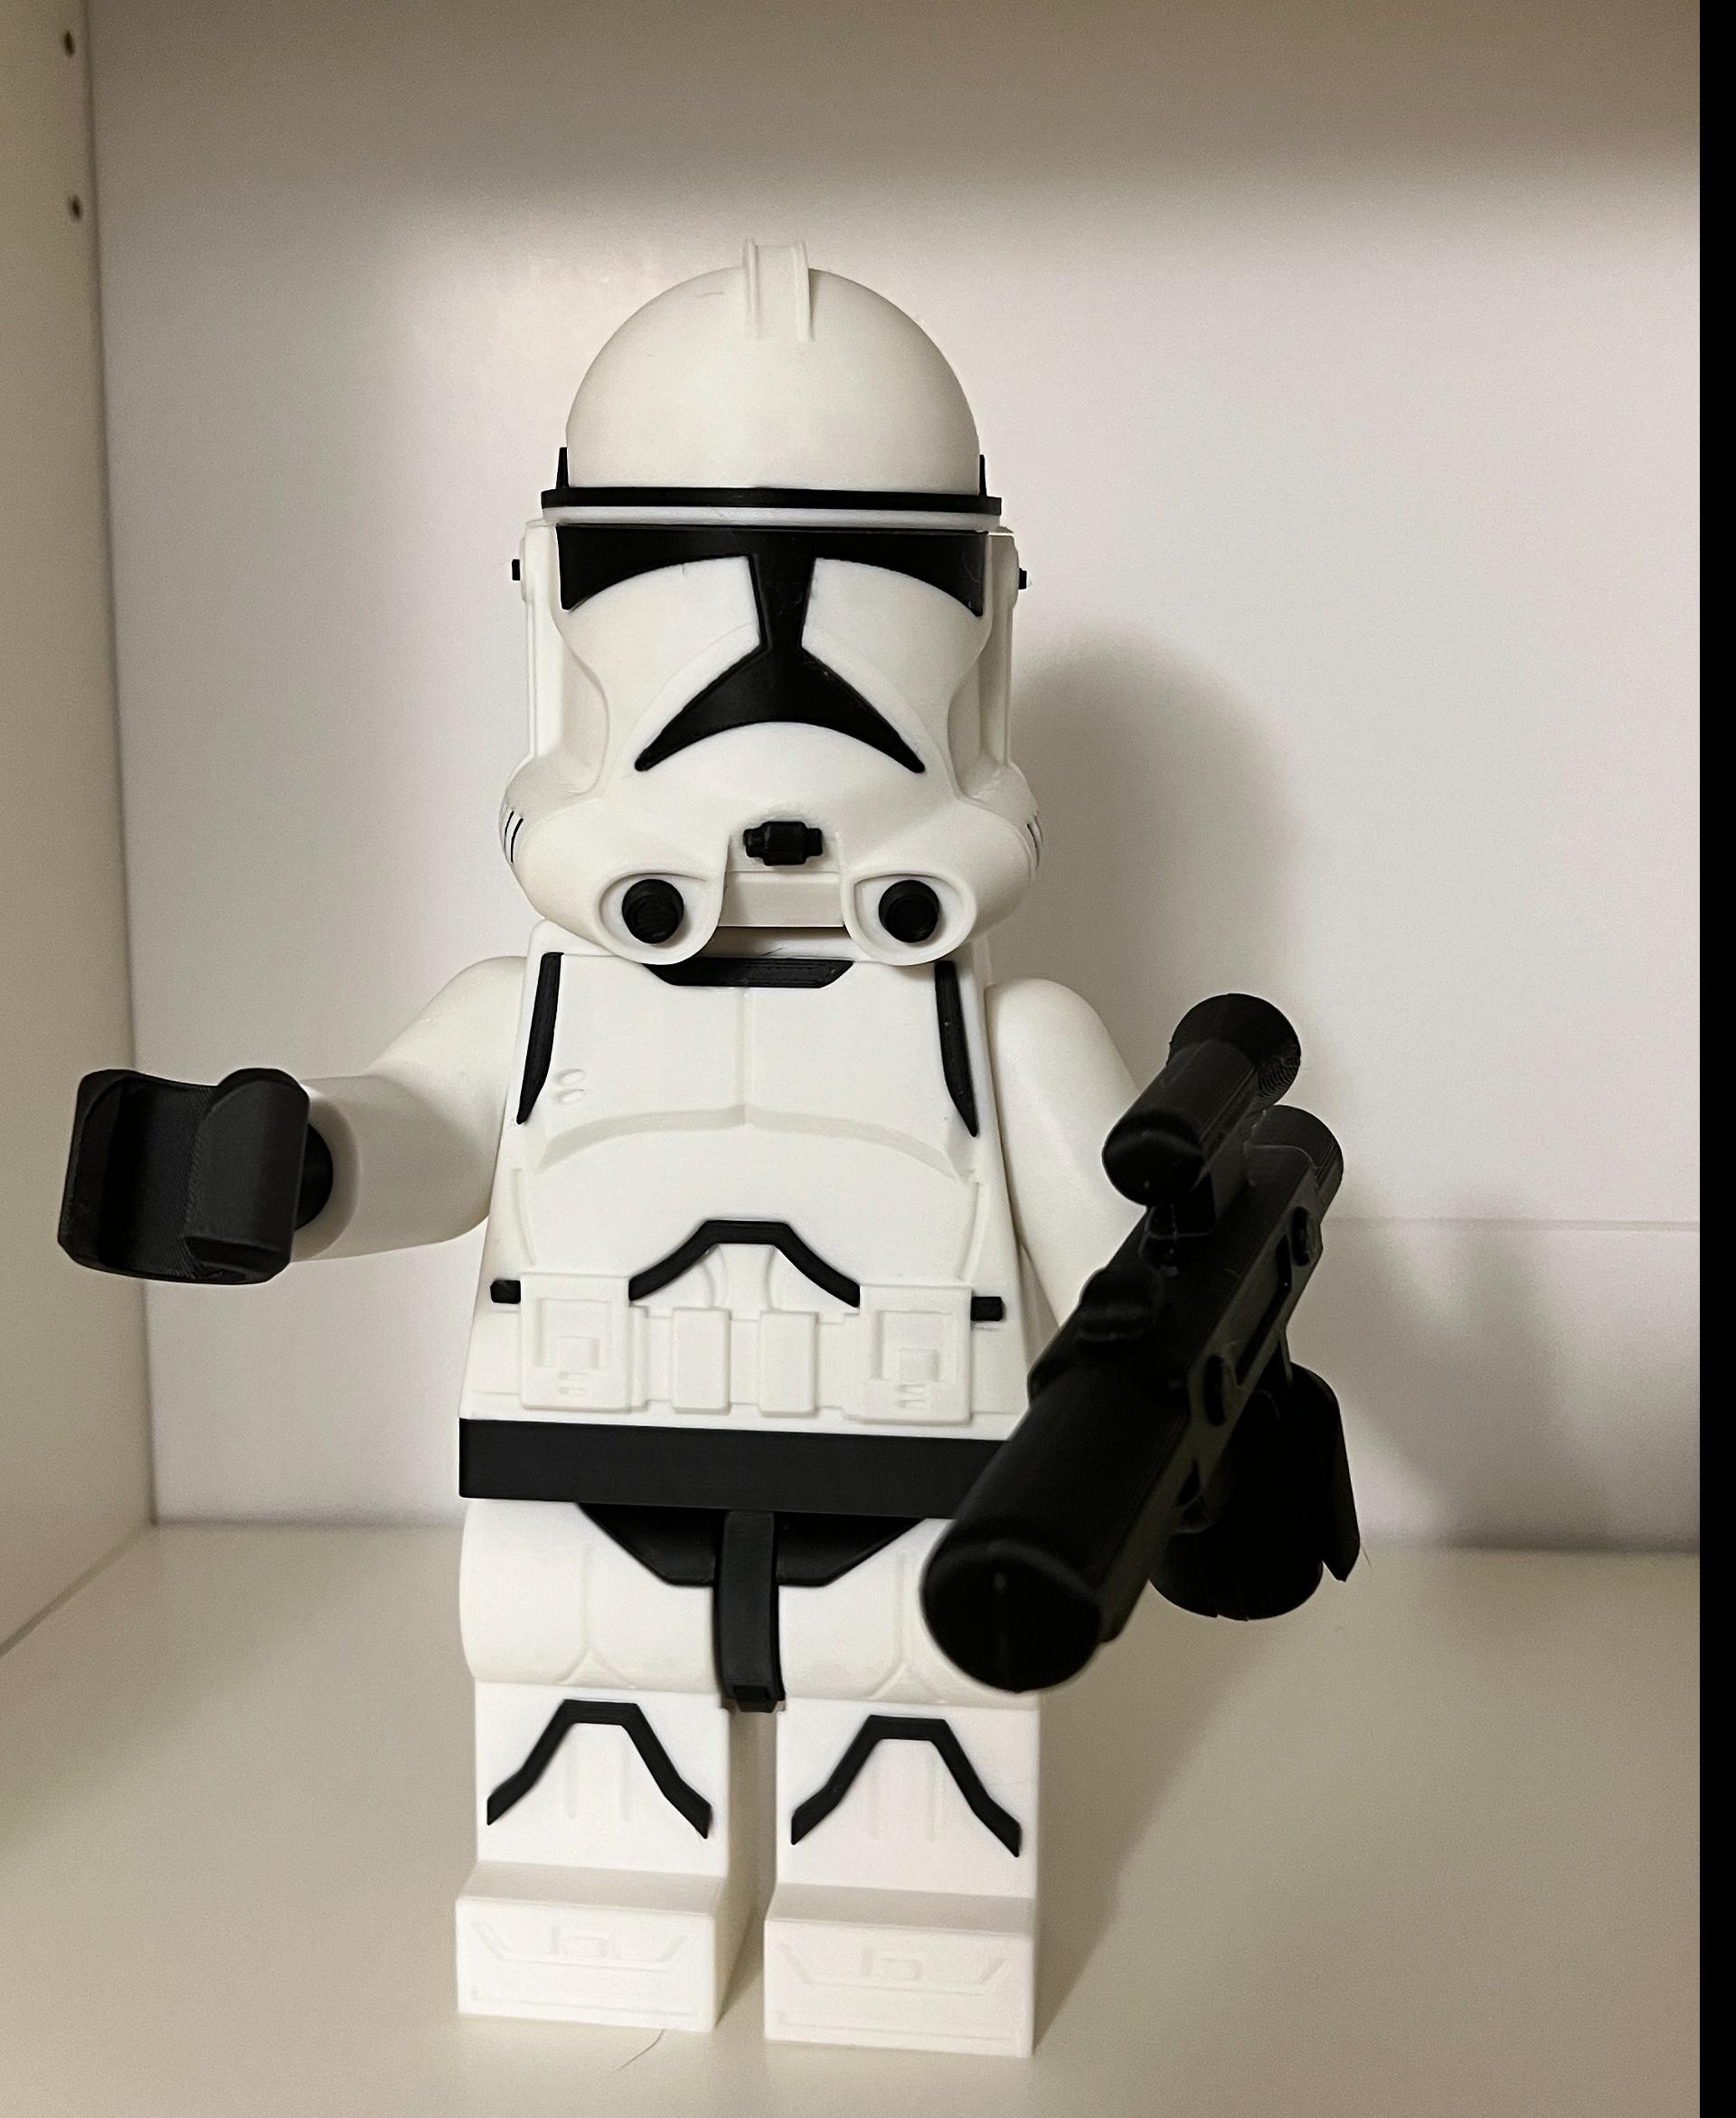 Clone Trooper - Phase II (9 inch brick figure, NO MMU/AMS, NO supports, NO glue) - Awesome print, amazing ways to avoid having to use supports - 3d model